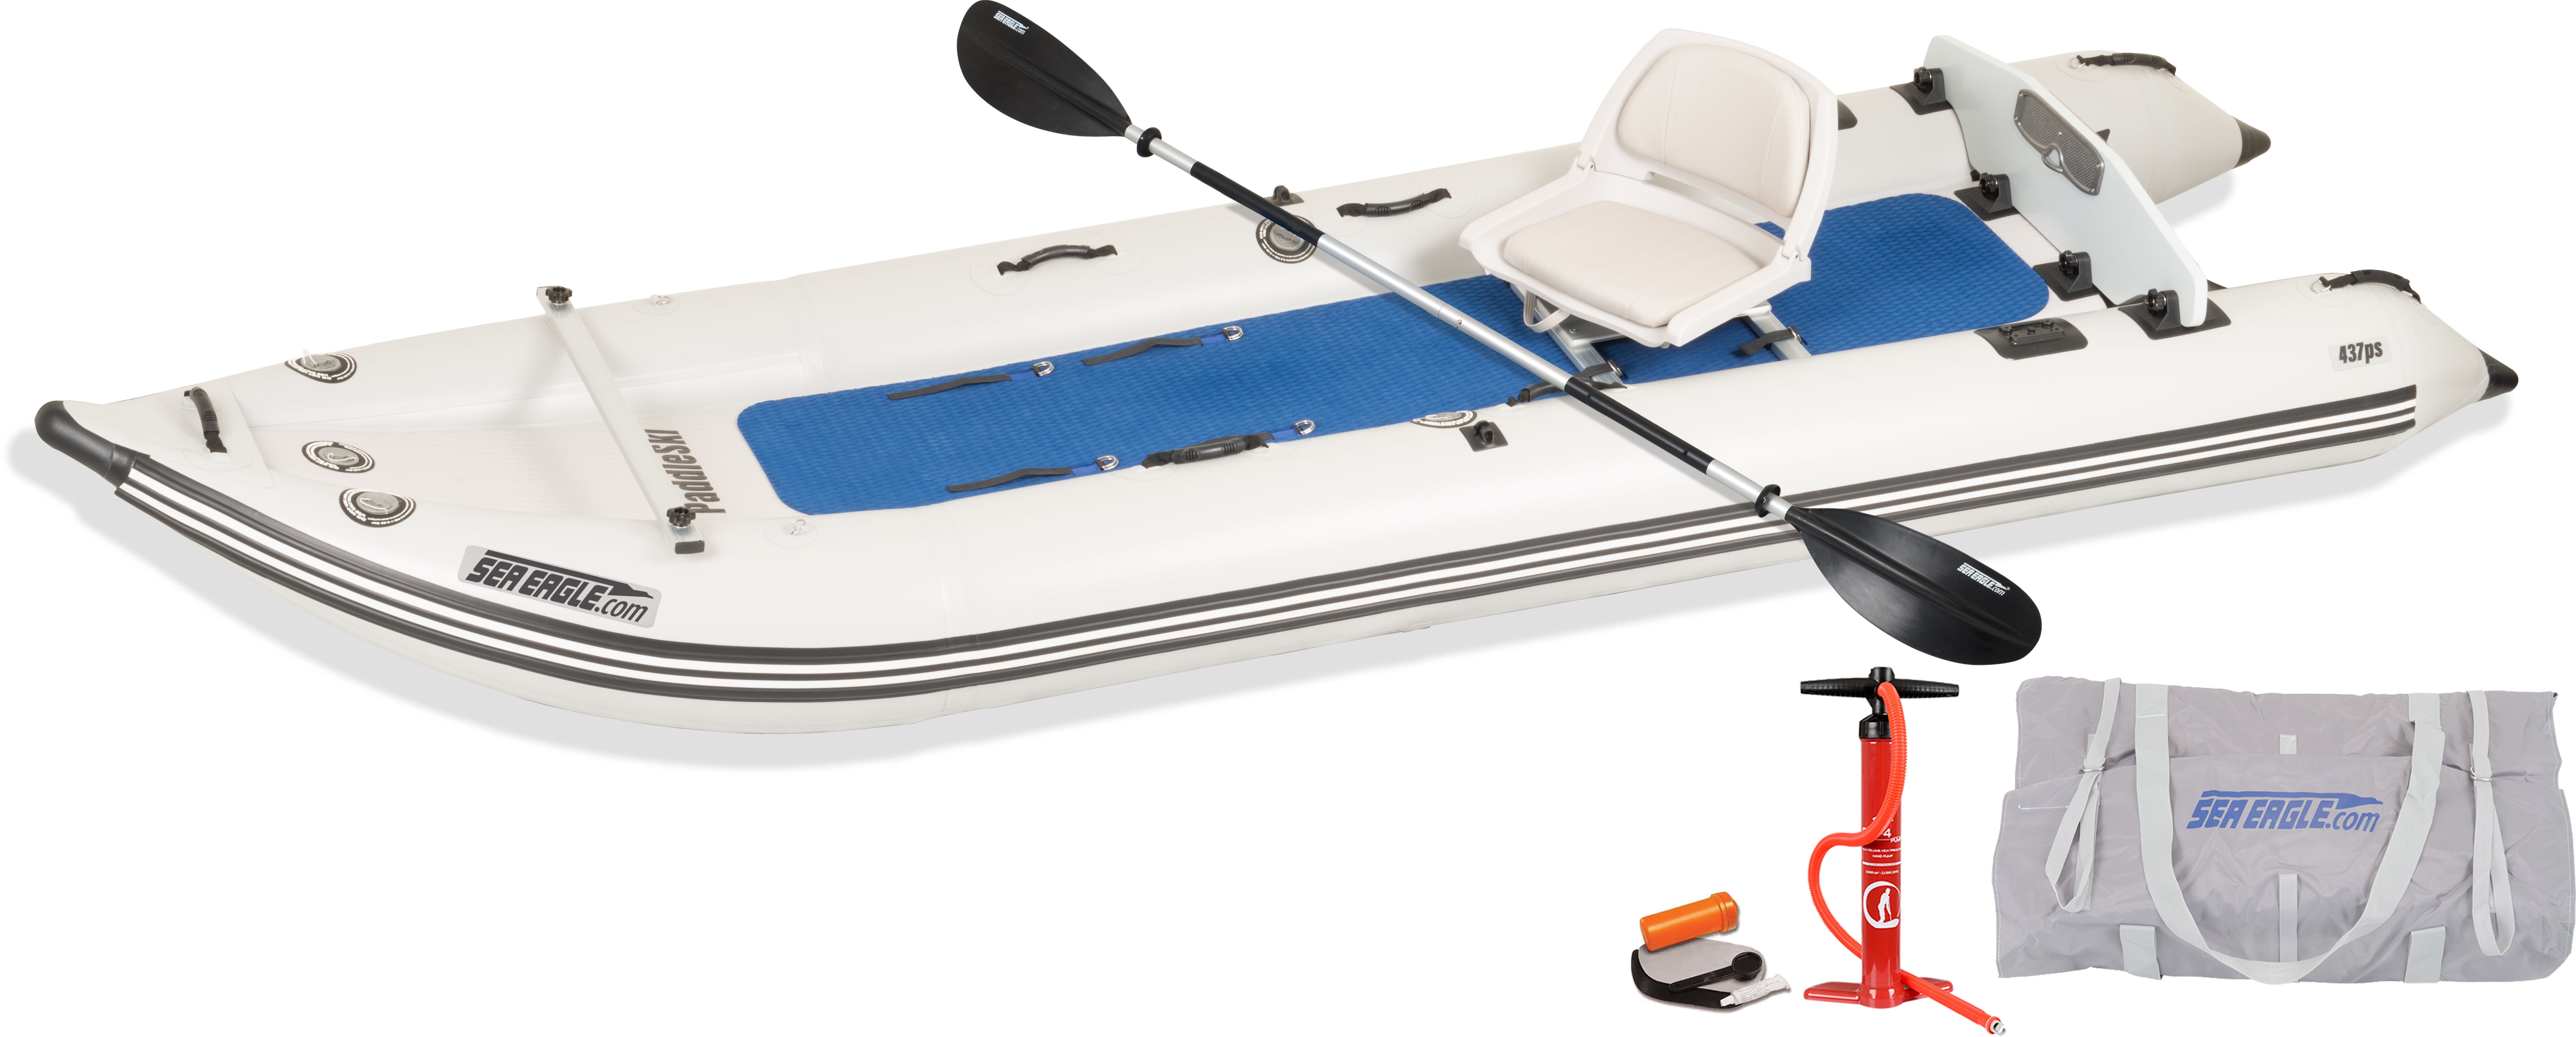 How Far Can You Go with an Inflatable Boat? - On The Water